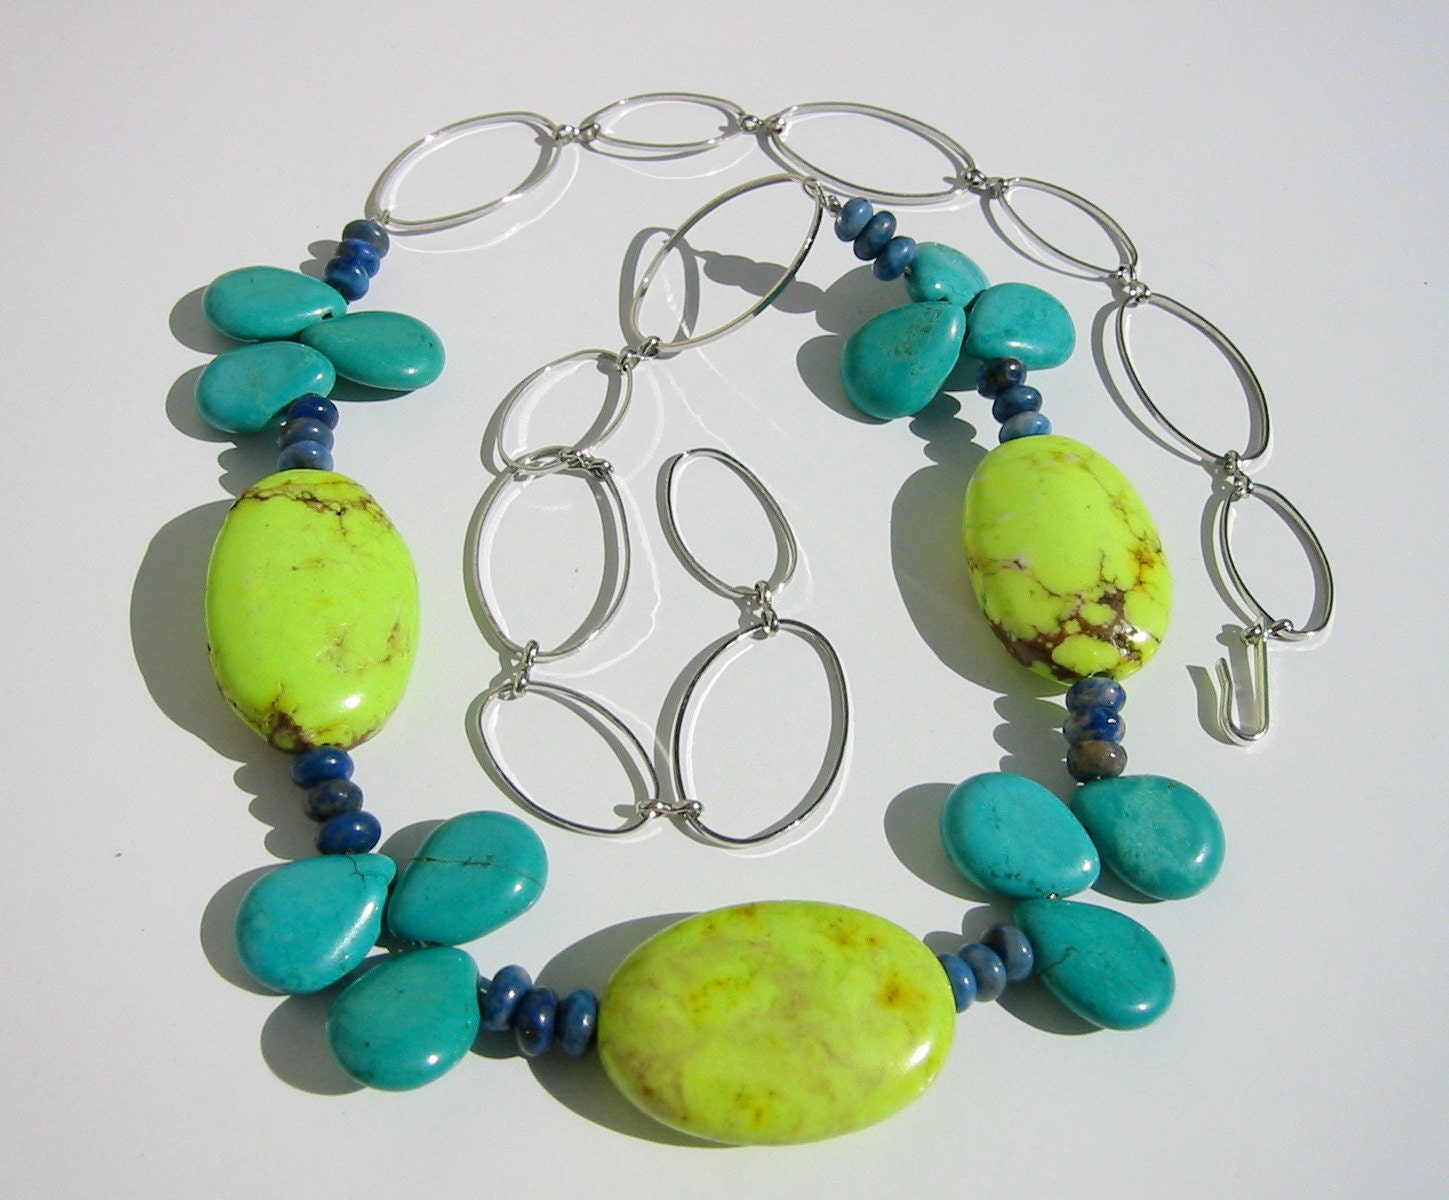 Blue gemstone necklace with turquoise, lime green magnesite, lapis lazuli and large silver chain